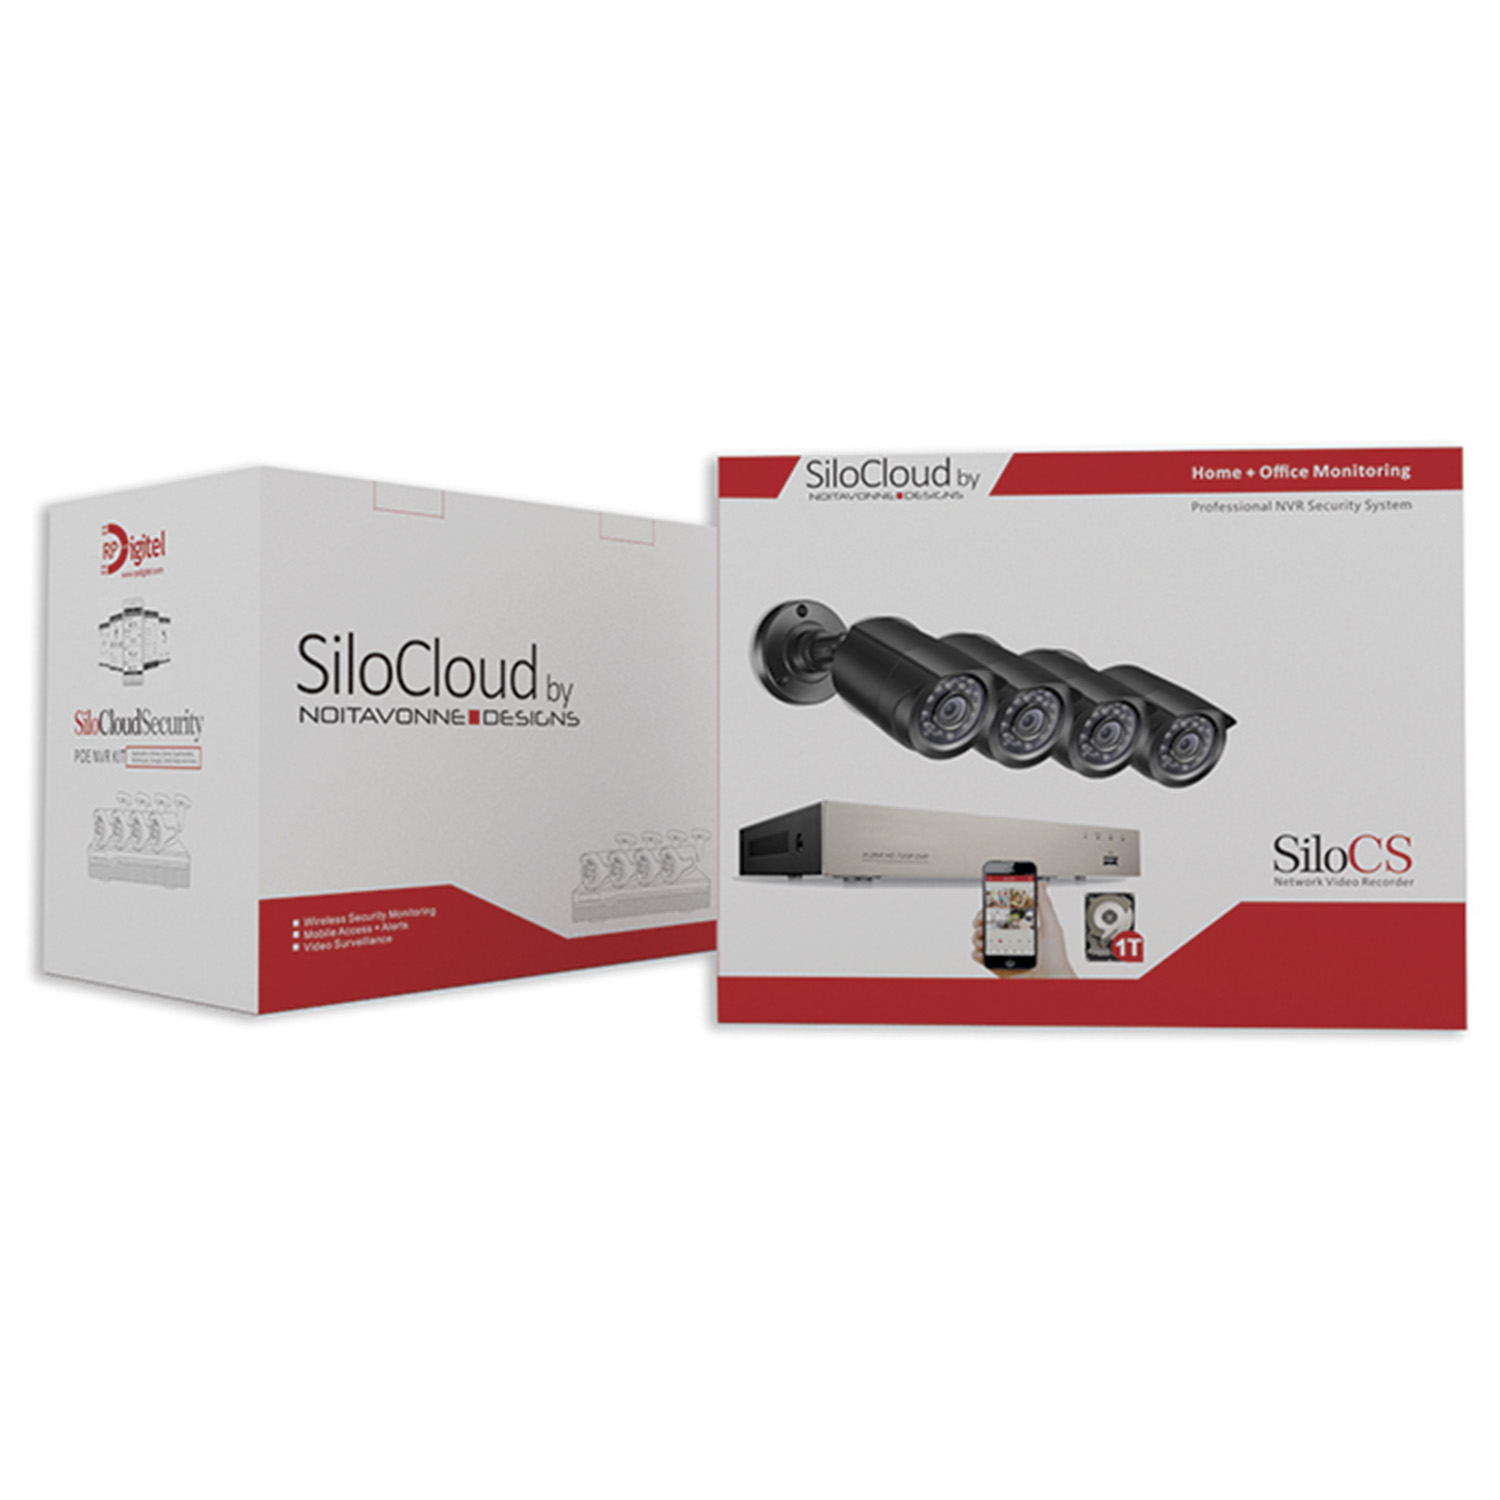 Silo CS Network Video Recorder - For Use In Homes, Stores, Supermarkets, Warehouses, Garages, Small Shops And More. Equipped With 4 Cameras, It Has Never Been Easier To Keep Your Family And Belongings Secure.Includes:4 Wired Camera2 Ethernet CablesAc AdapterMounting HardwareMouseVideo Recorder DevicePower Cord